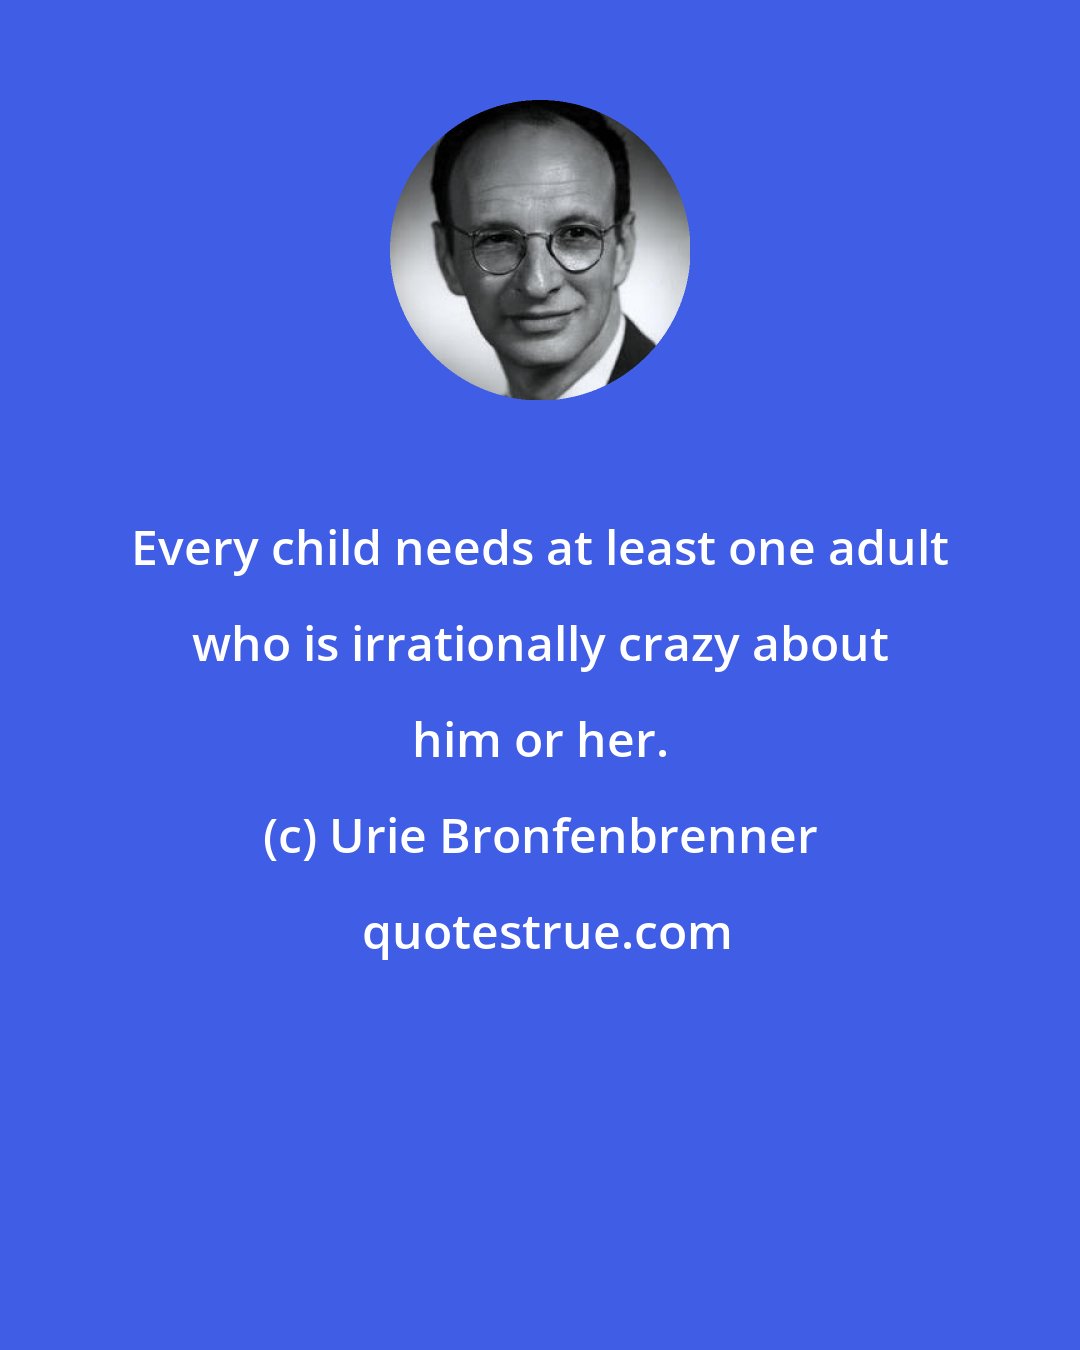 Urie Bronfenbrenner: Every child needs at least one adult who is irrationally crazy about him or her.